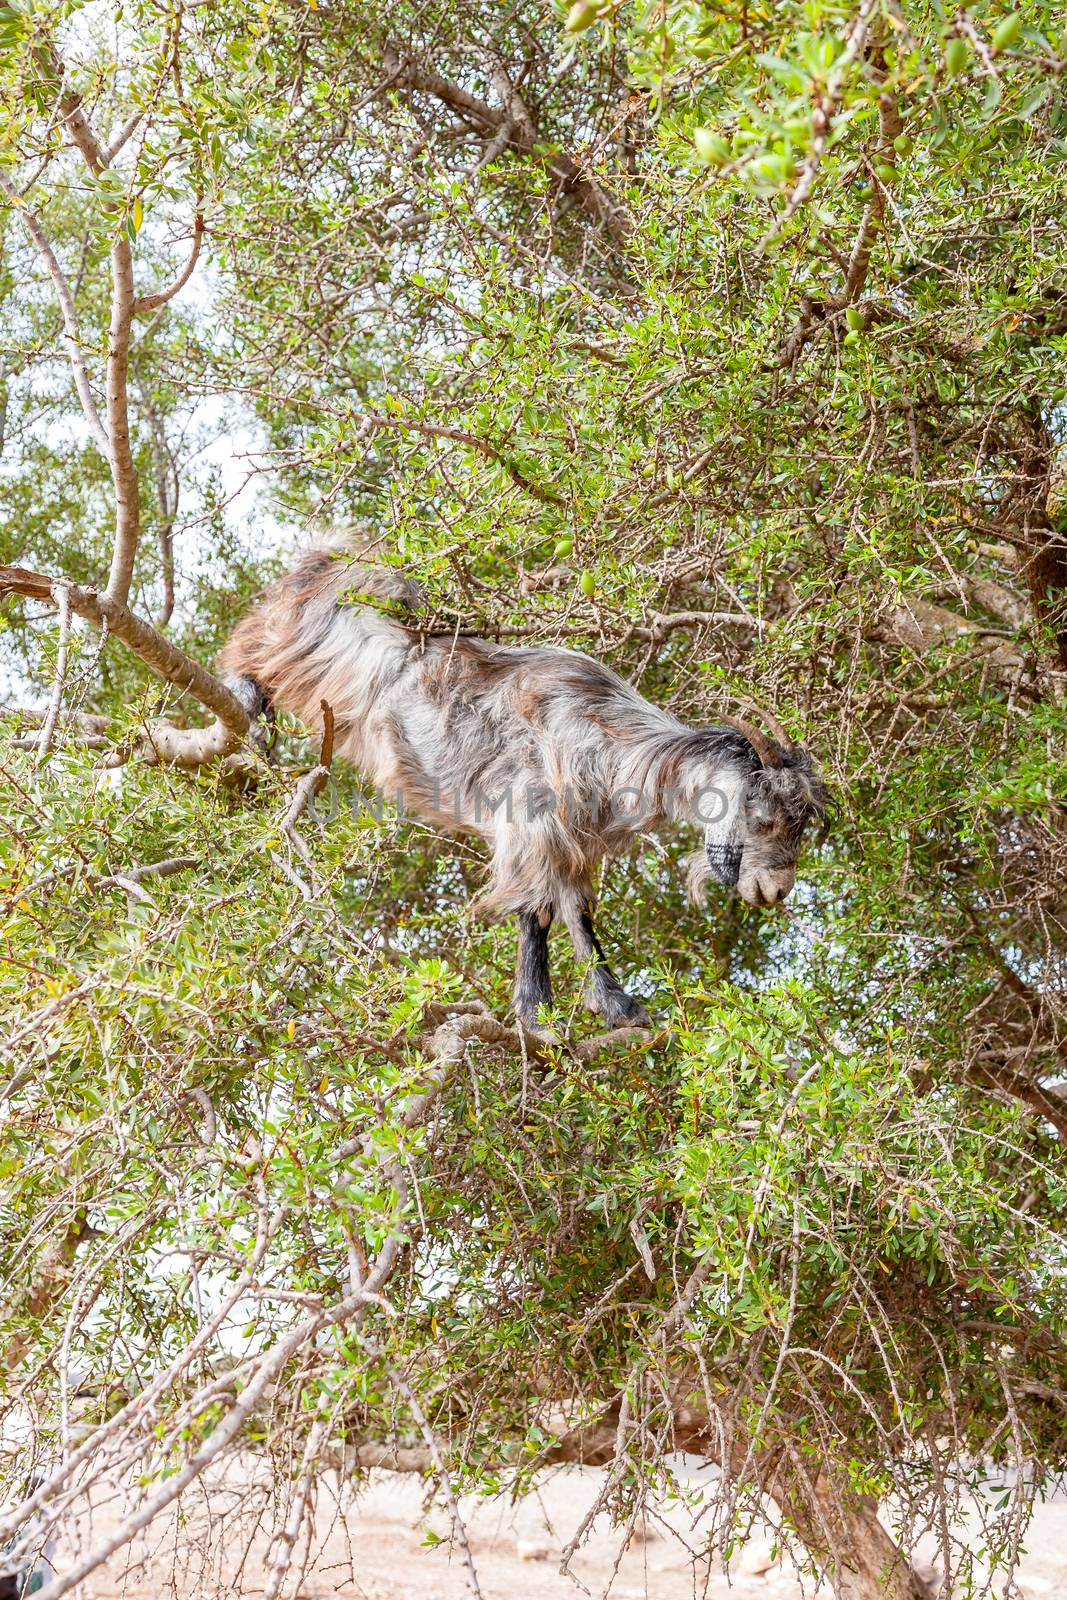 The Morocco Goat feeding in a tree by master1305